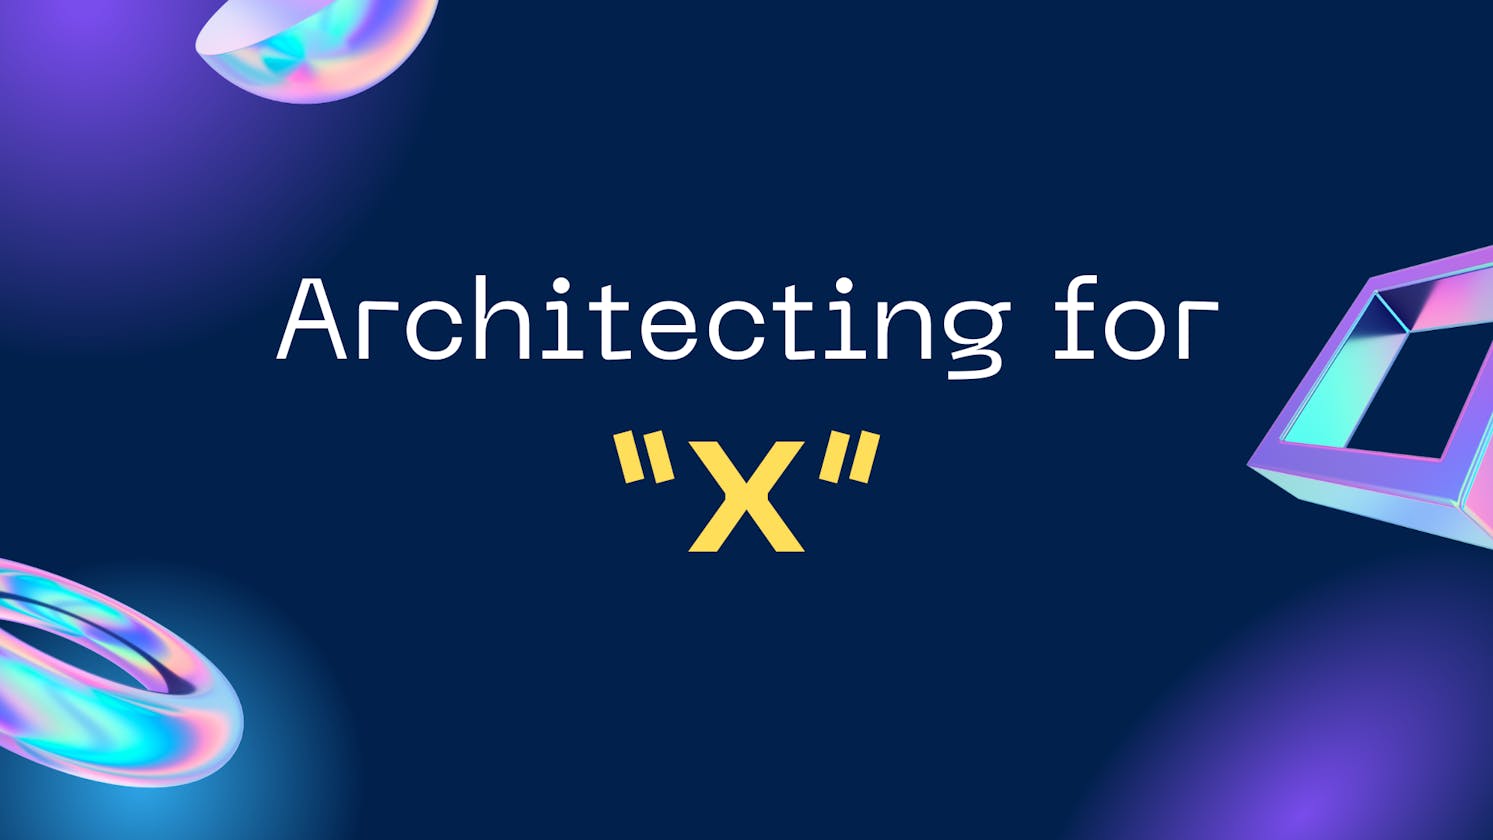 Architecting for "X"